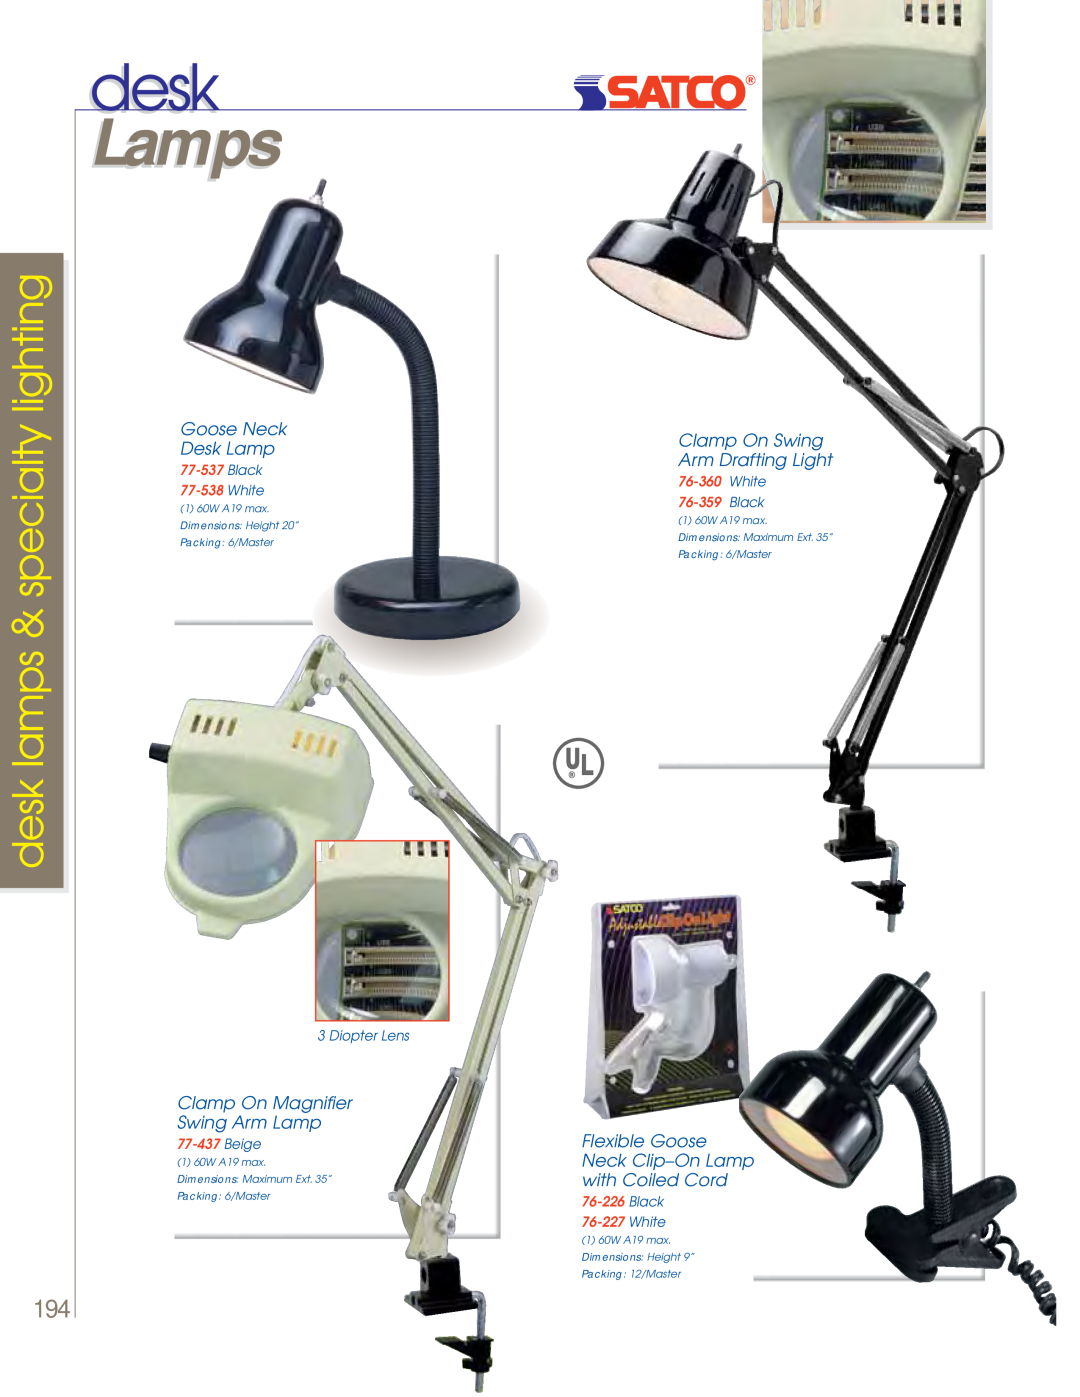 Satco Products 60-800 Lamps, desk lamps & specialty lighting, Goose Neck Desk Lamp, Clamp On Magnifier Swing Arm Lamp 